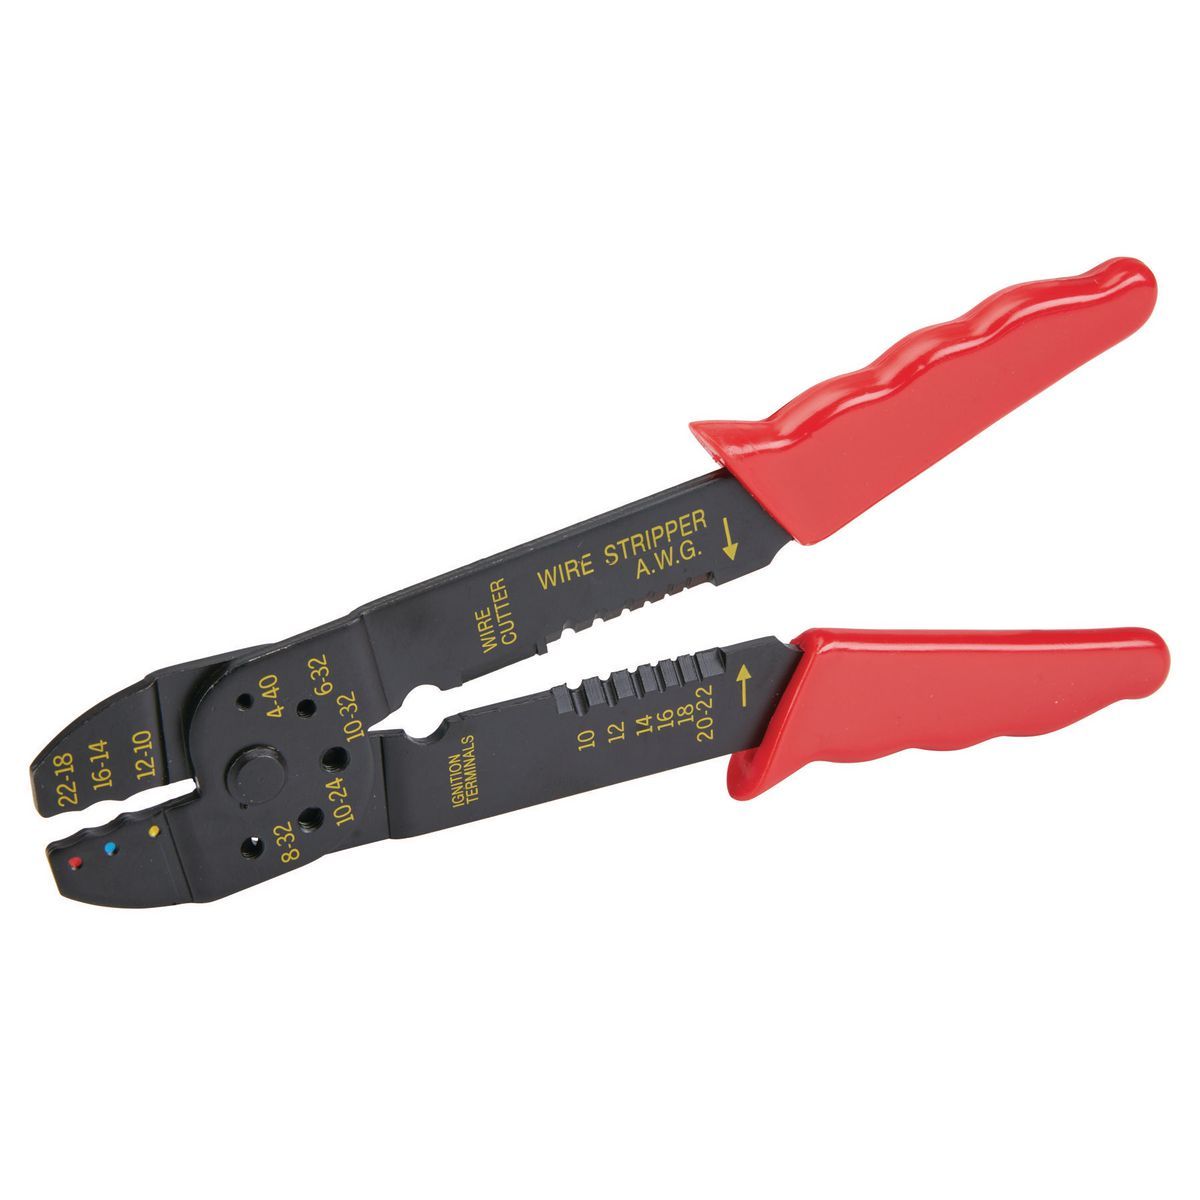 PITTSBURGH 8 In. Four-Way Wire Crimper/Stripper Tool